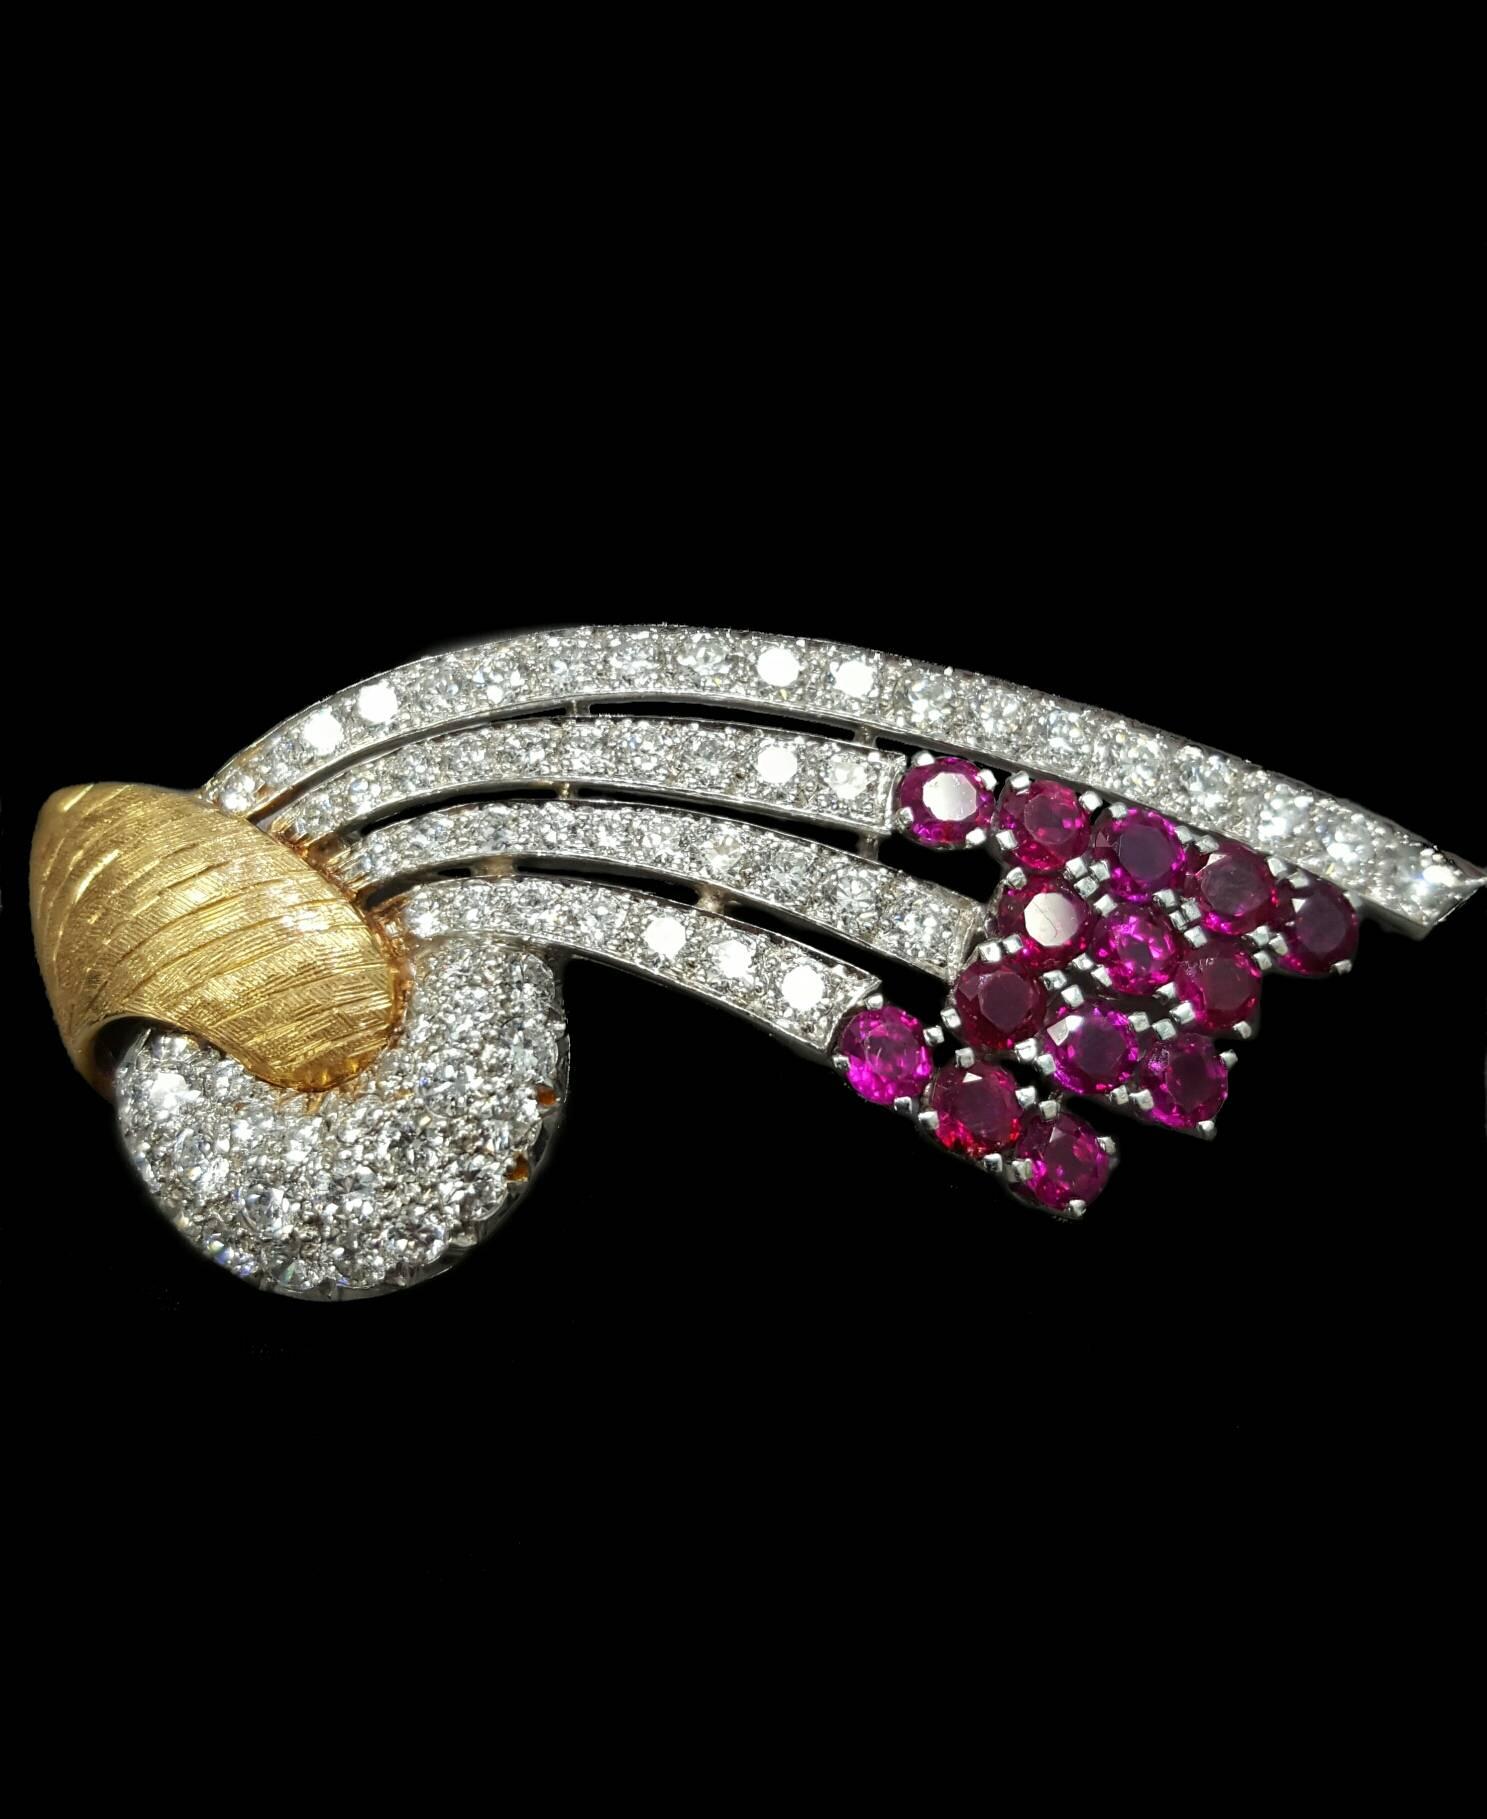 An expertly crafted mid century brooch that is set with 72 Round Brilliant cut diamonds and 14 Round cut rubies. The brooch itself is made from platinum and 18 karat yellow gold. The diamonds are all F to G color and VS1 to VS2 clarity. The rubies